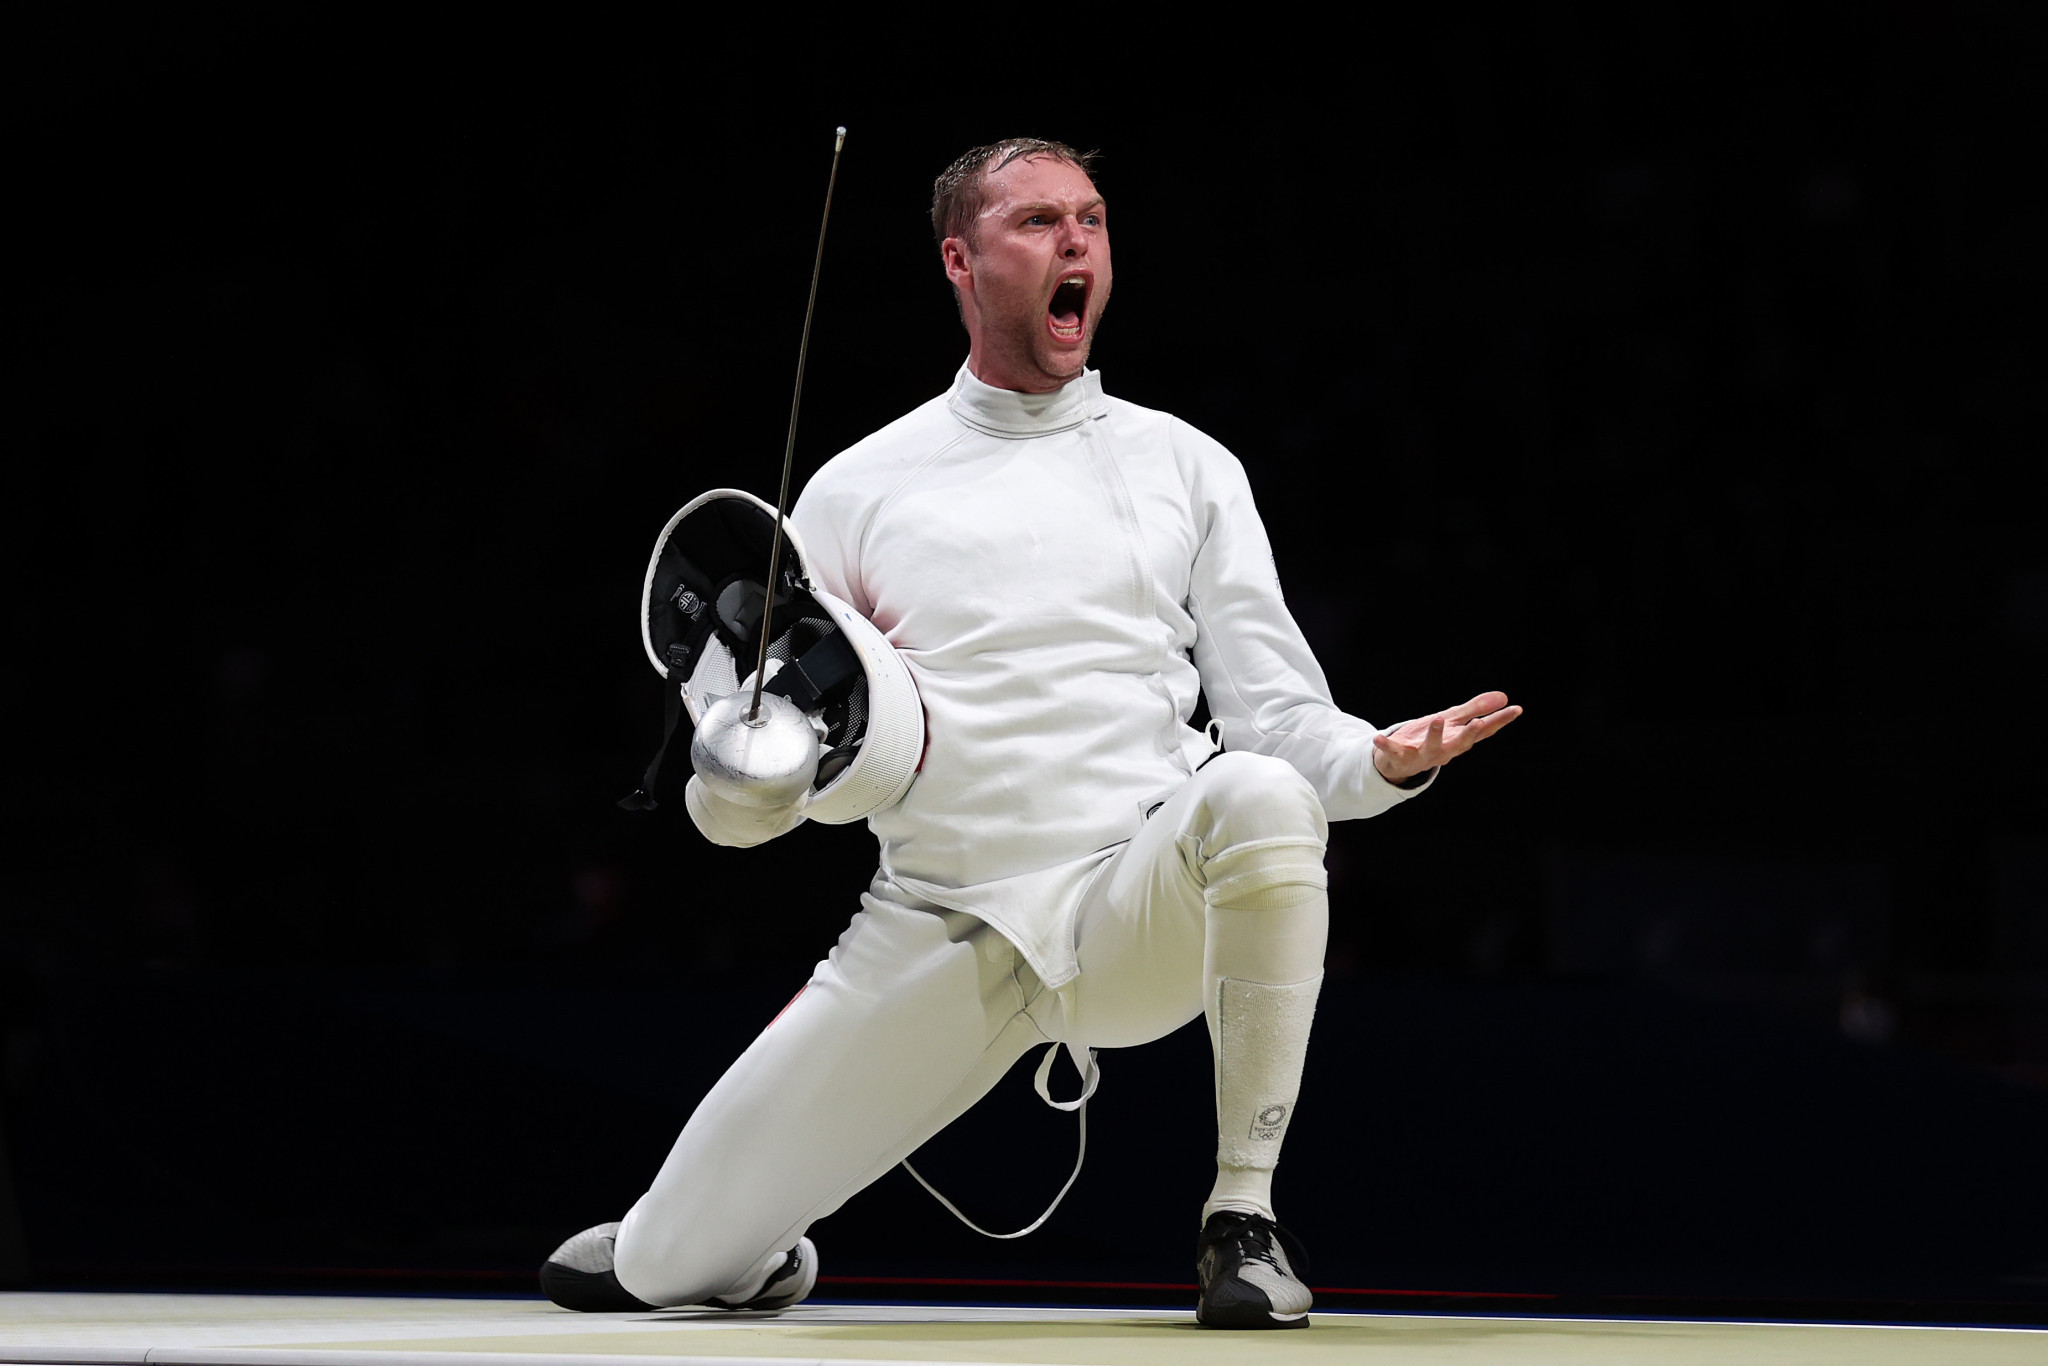 France's Alexandre Bardenet won the individual men's épée FIE World Cup in Istanbul ©Getty Images